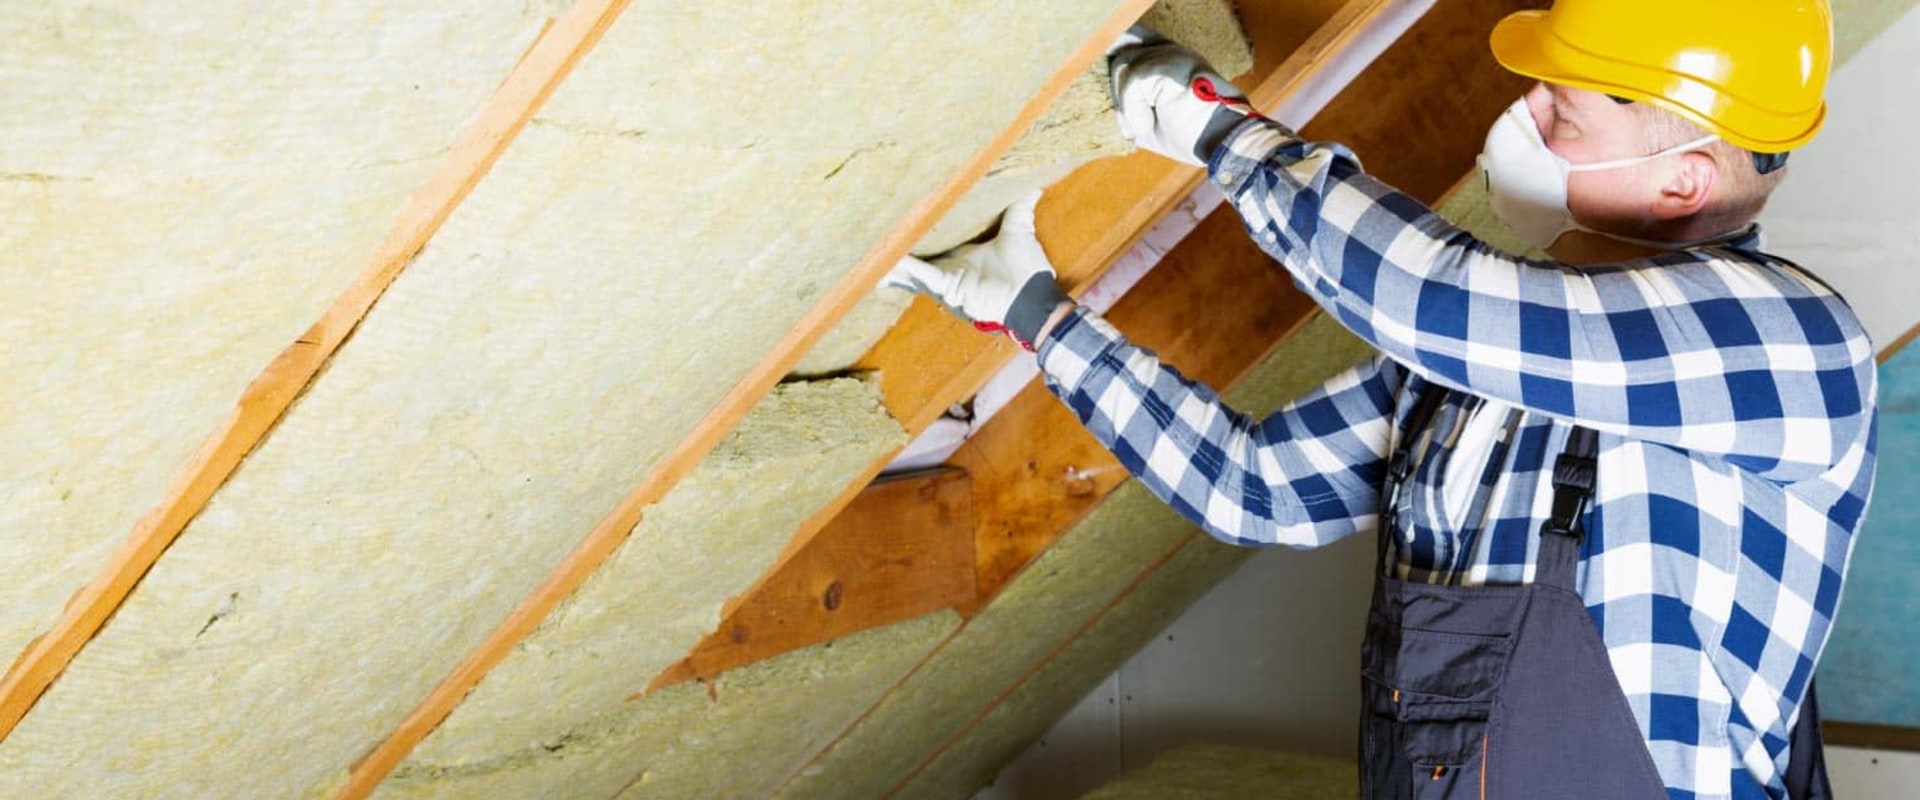 What insulation is best for roof rafters?